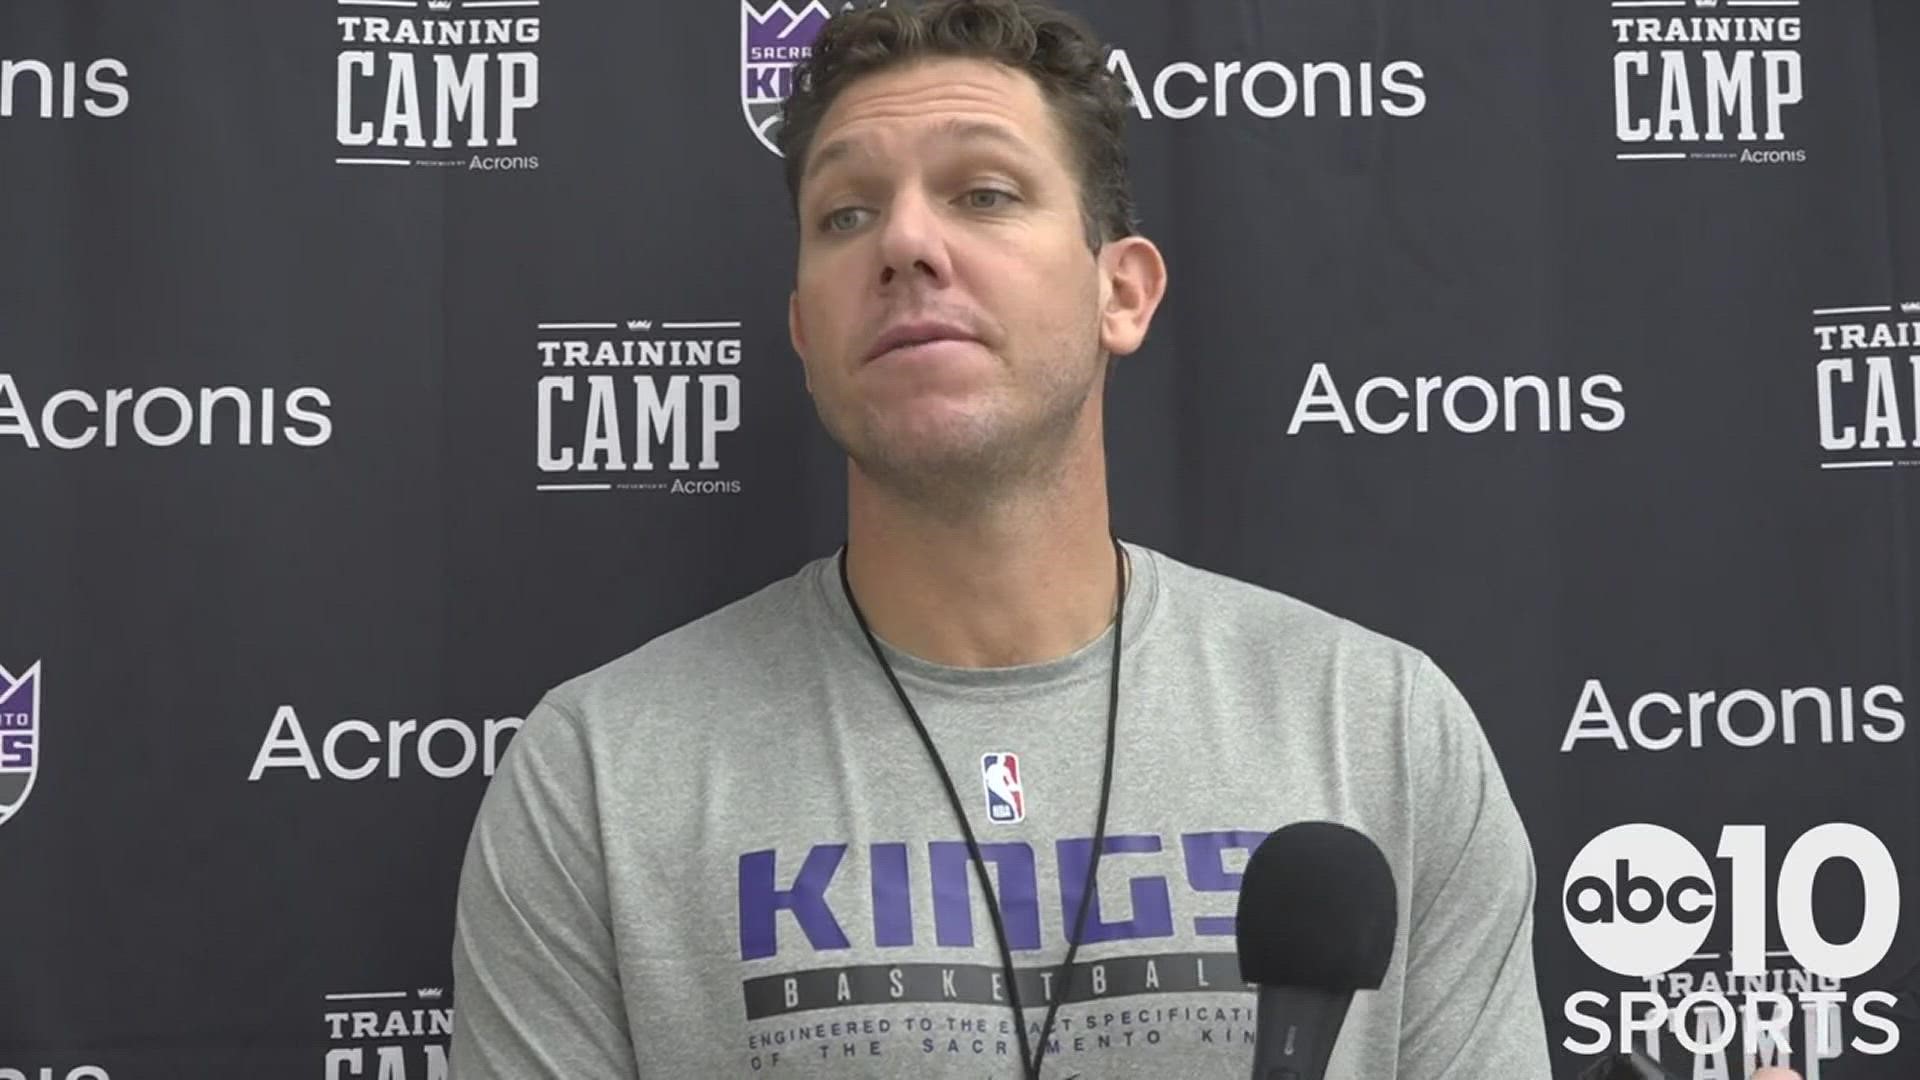 Sacramento Kings head coach Luke Walton discusses the progress being made through the first four days of training camp leading up to Monday's preseason opener.